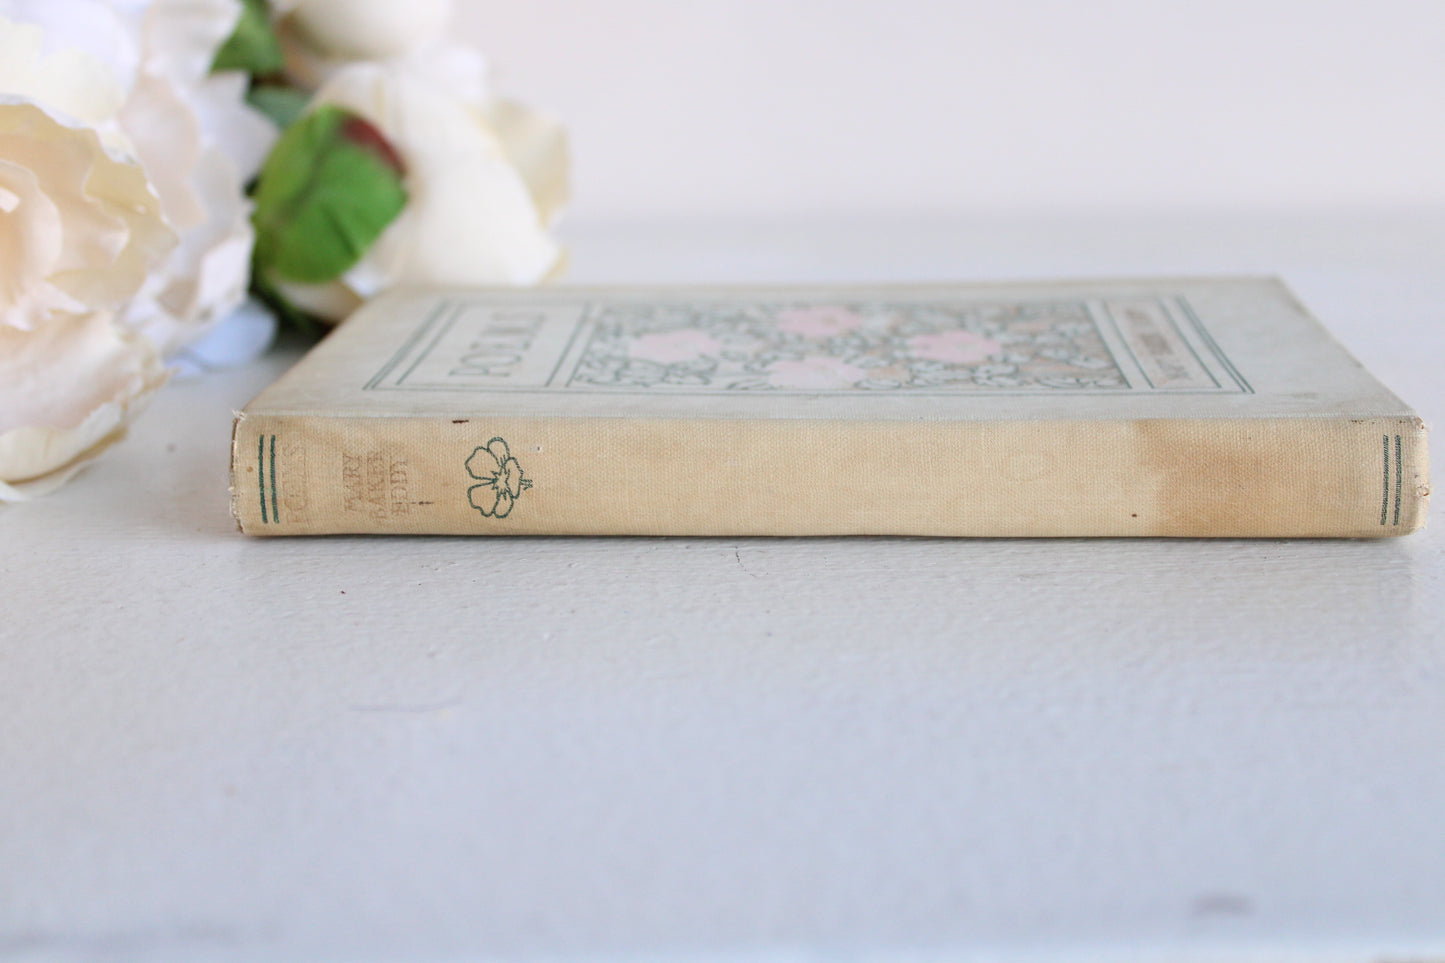 Antique 1910s 1st Edition of Mary Baker Eddy's "Poems"